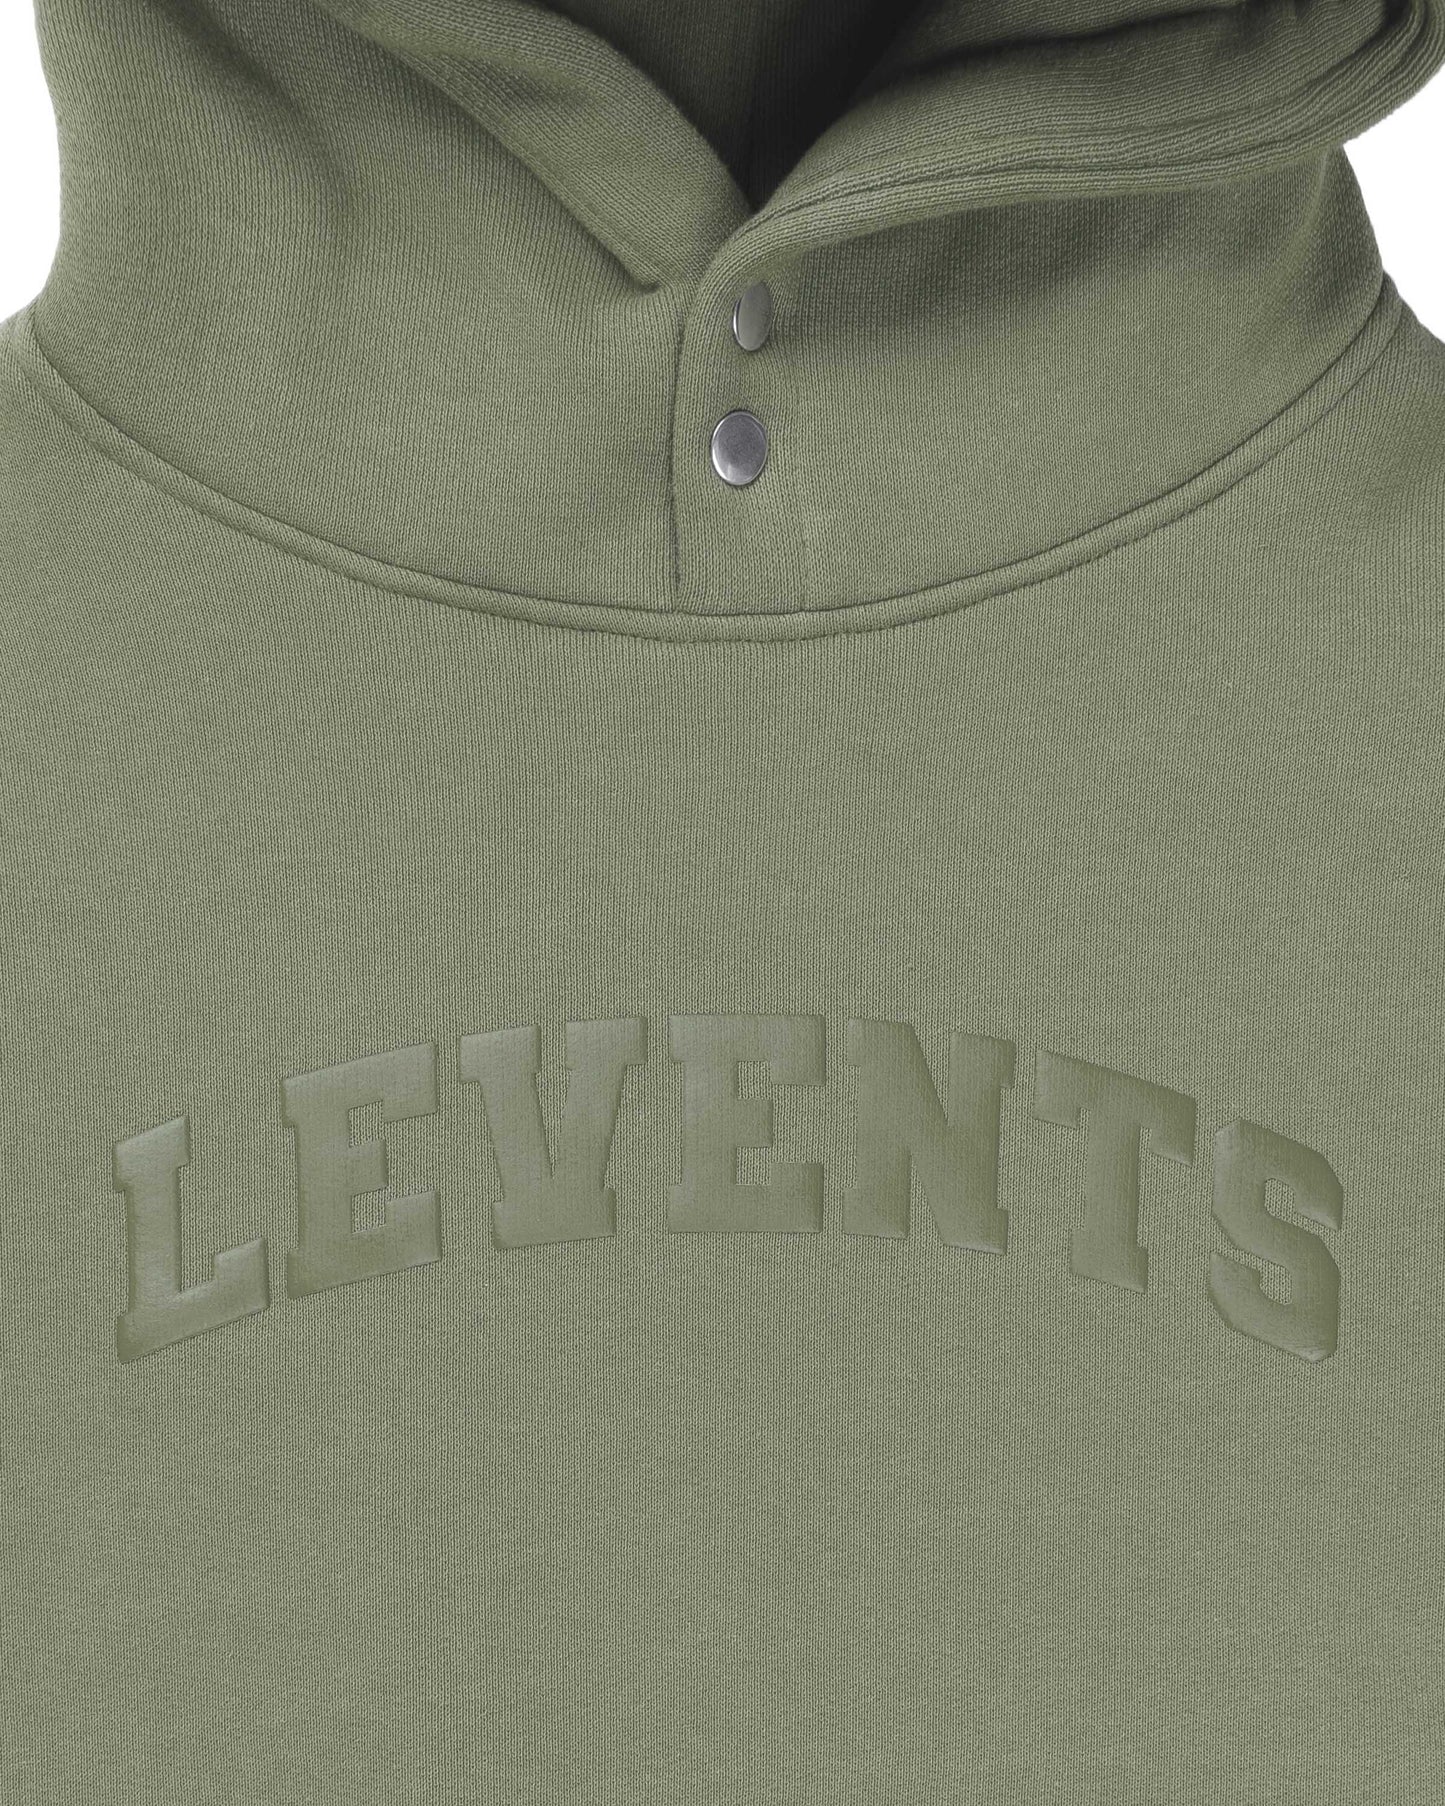 Levents® College Vibe Boxy 2.0 Hoodie/ Olive